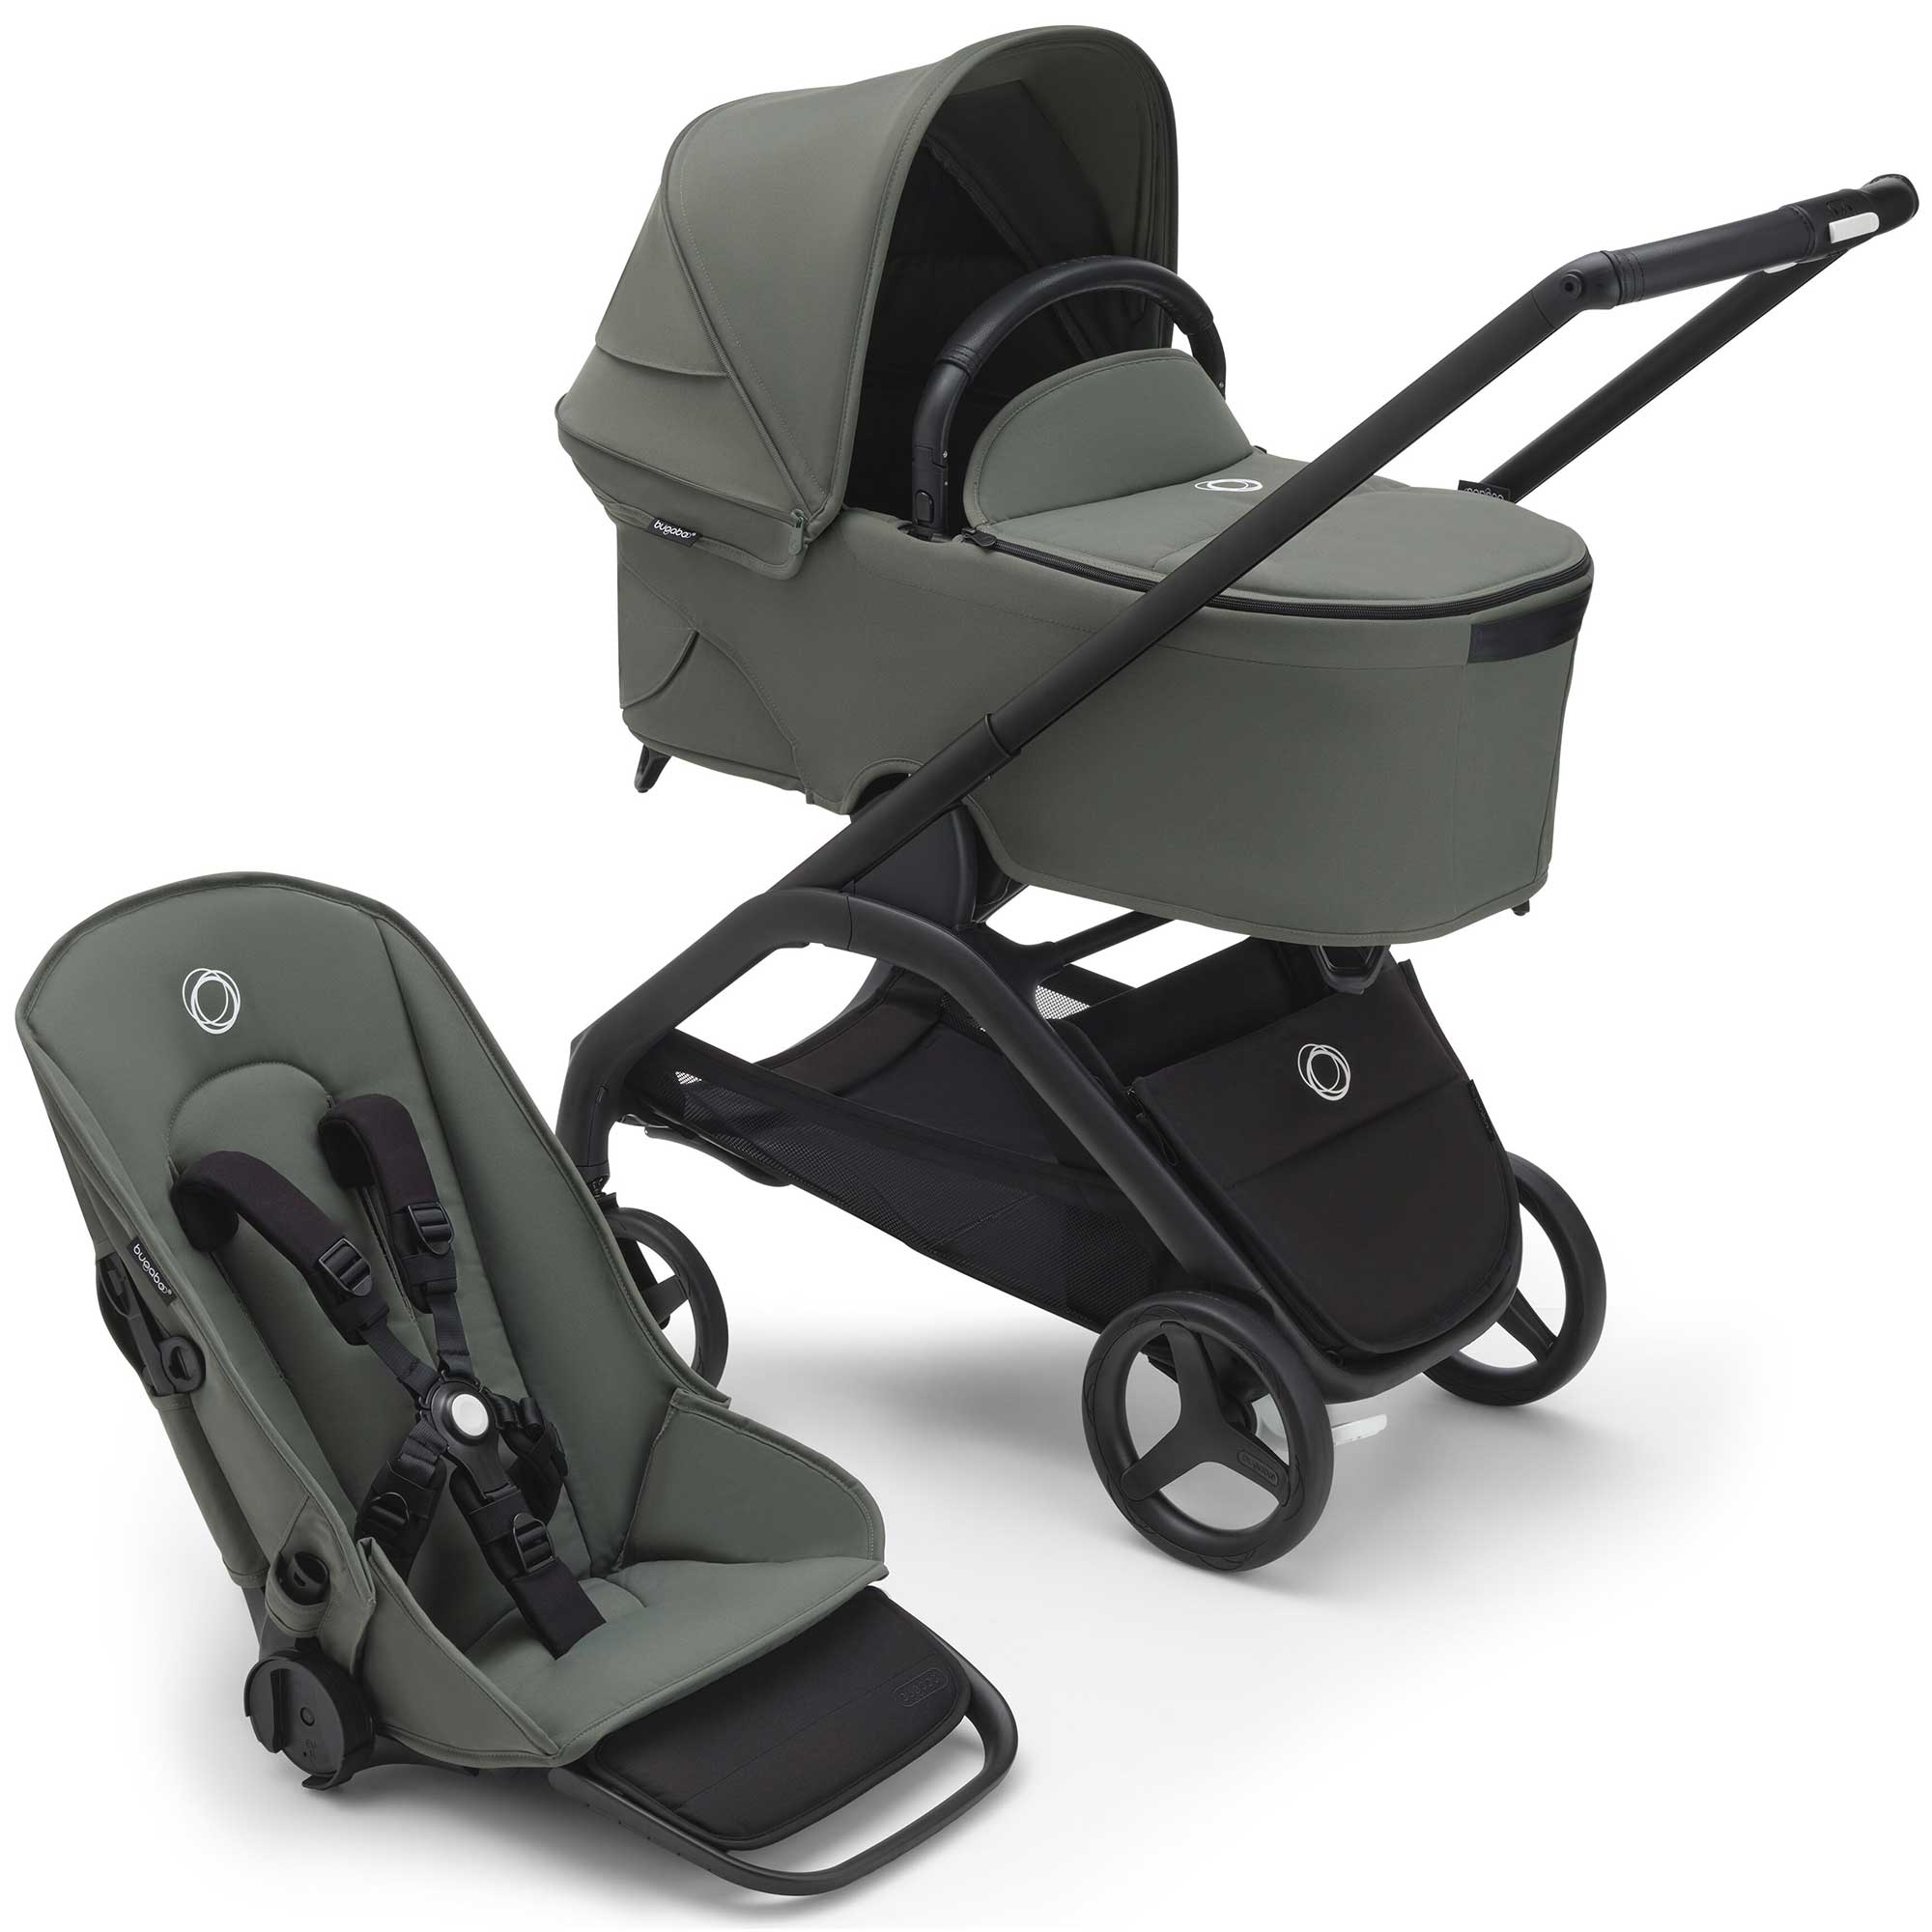 Bugaboo Travel Systems Bugaboo Dragonfly Pebble 360 Pro Travel System in Black/Forest Green 13818-BLK-FOR-GRN